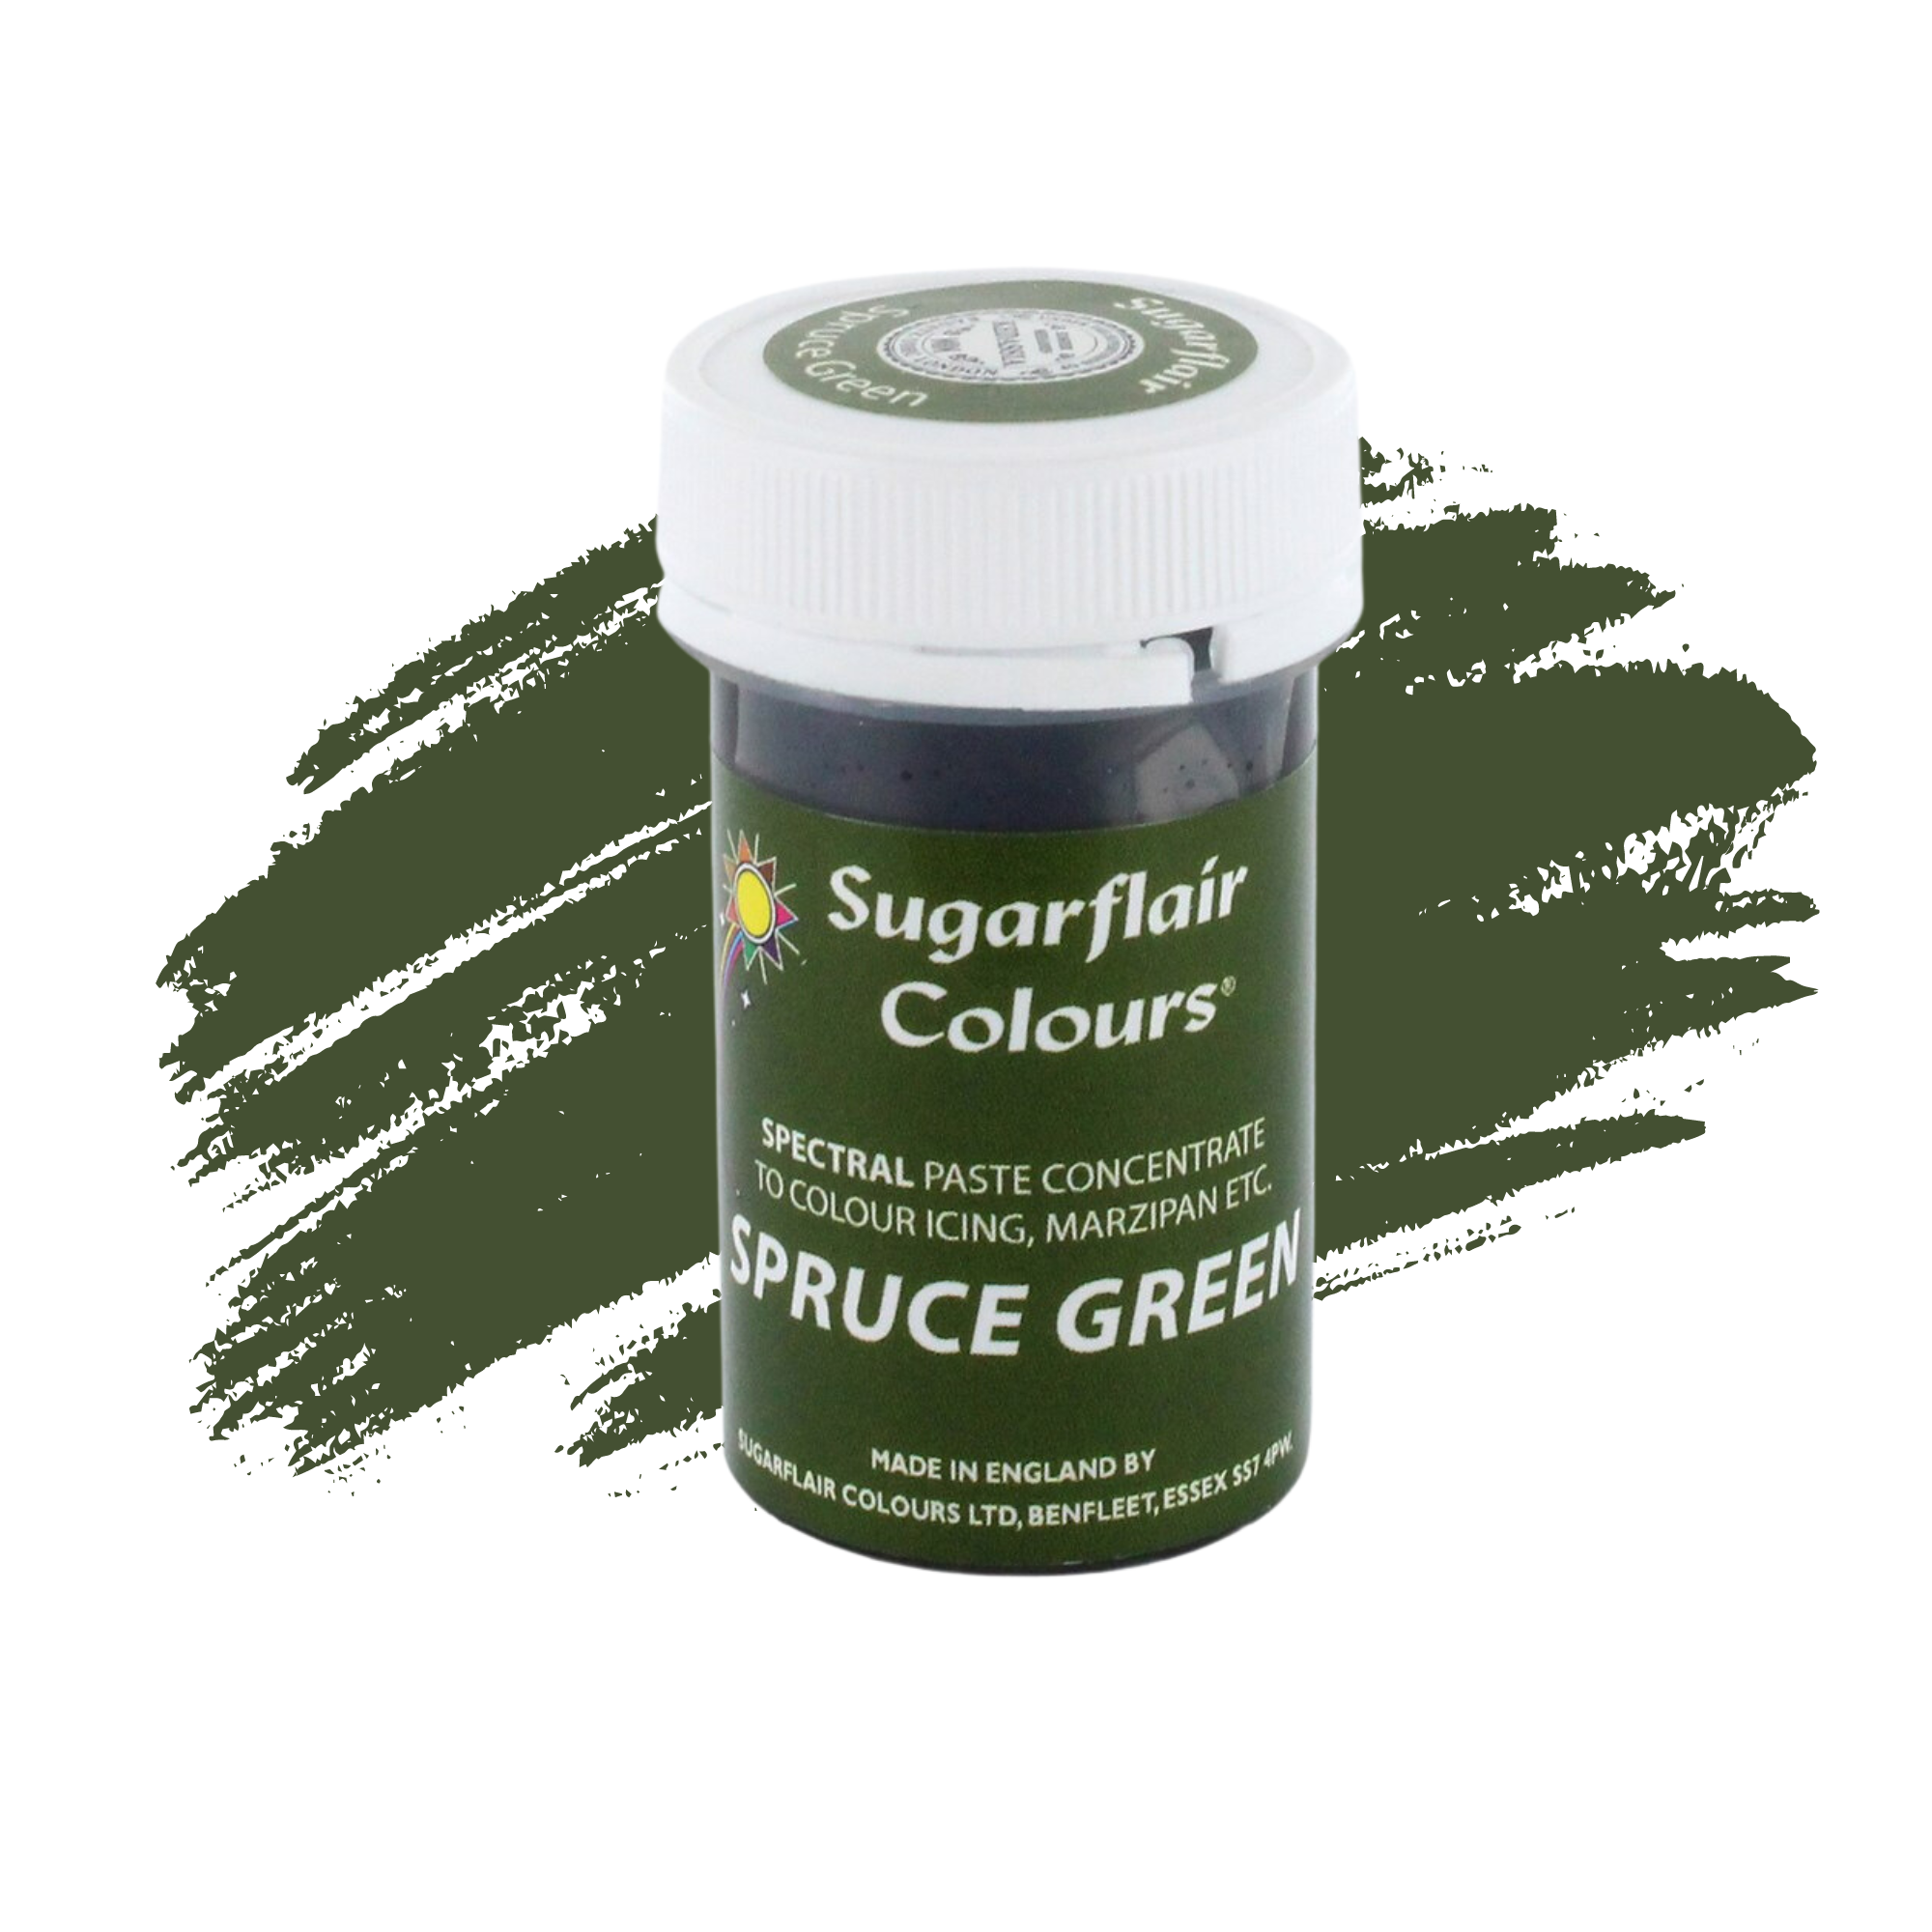 Sugarflair Paste Colours Concentrated Food Colouring - Spectral Spruce Green - 25g